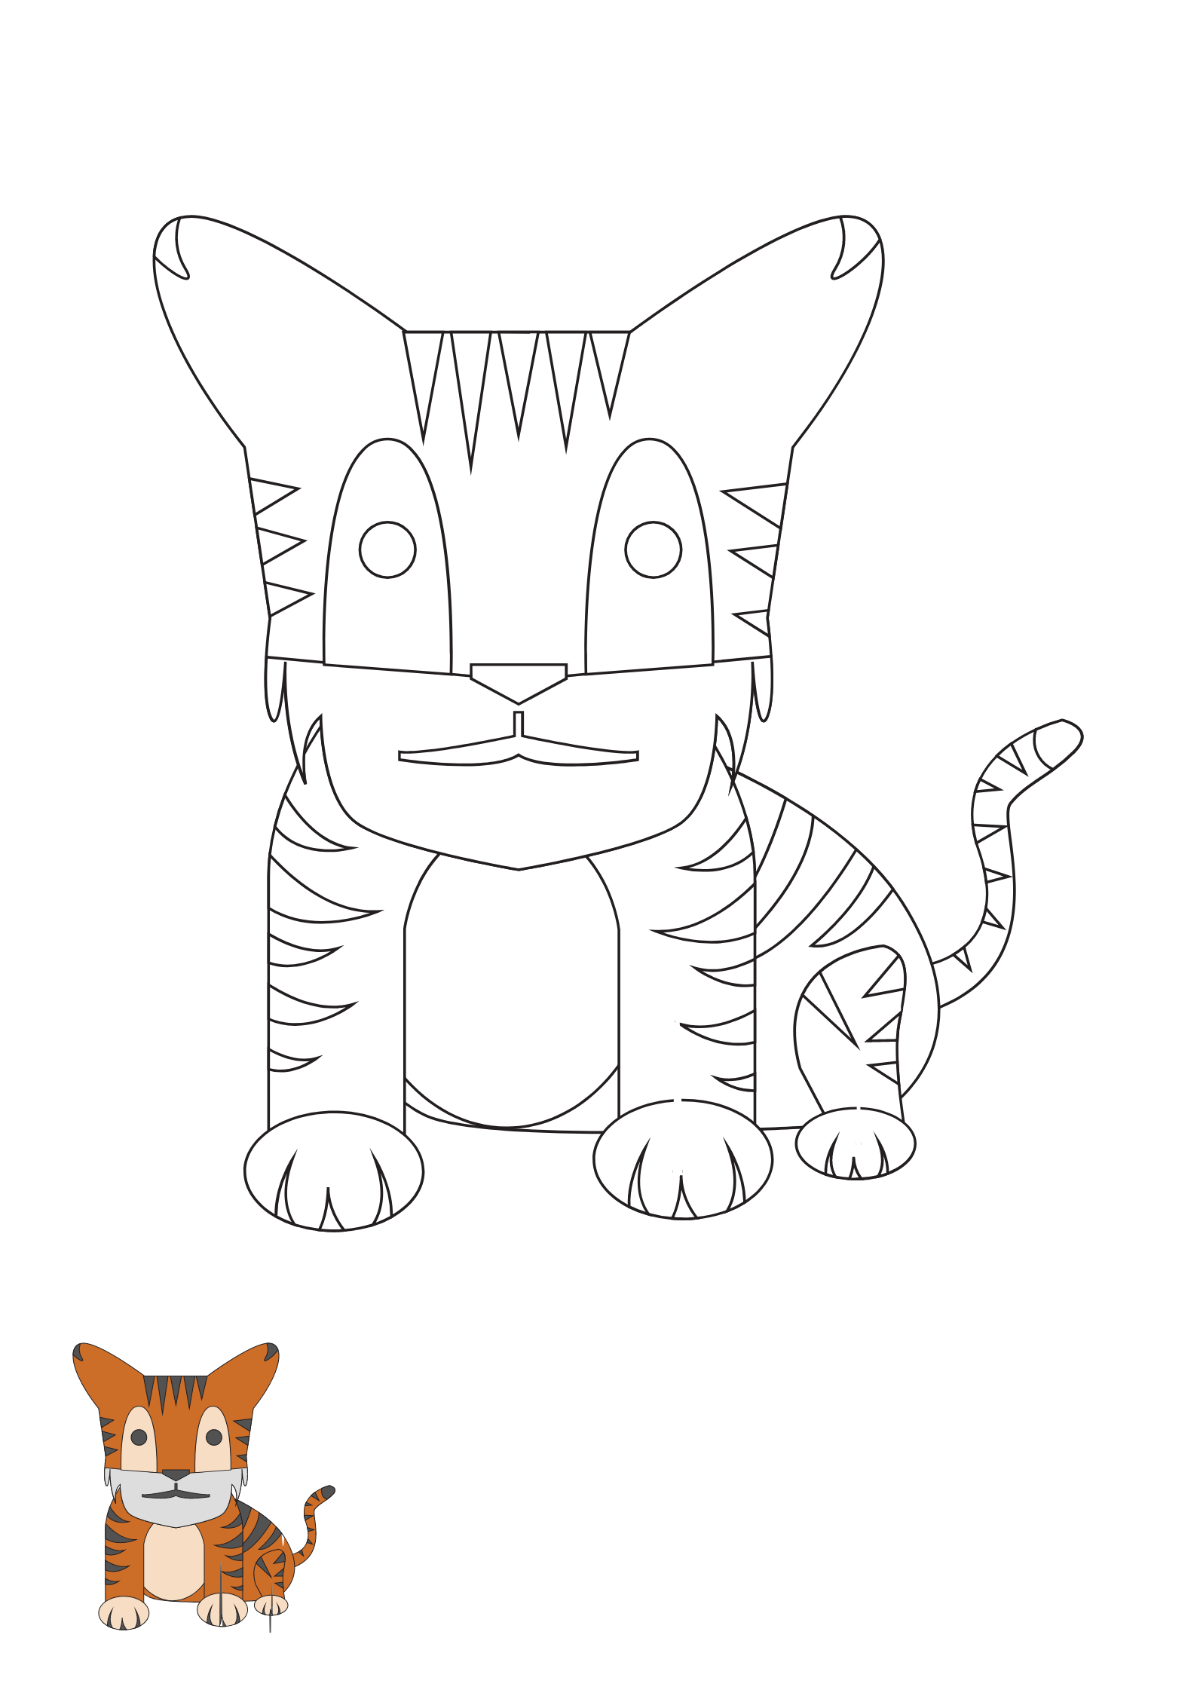 Flat Tiger Coloring Page Template